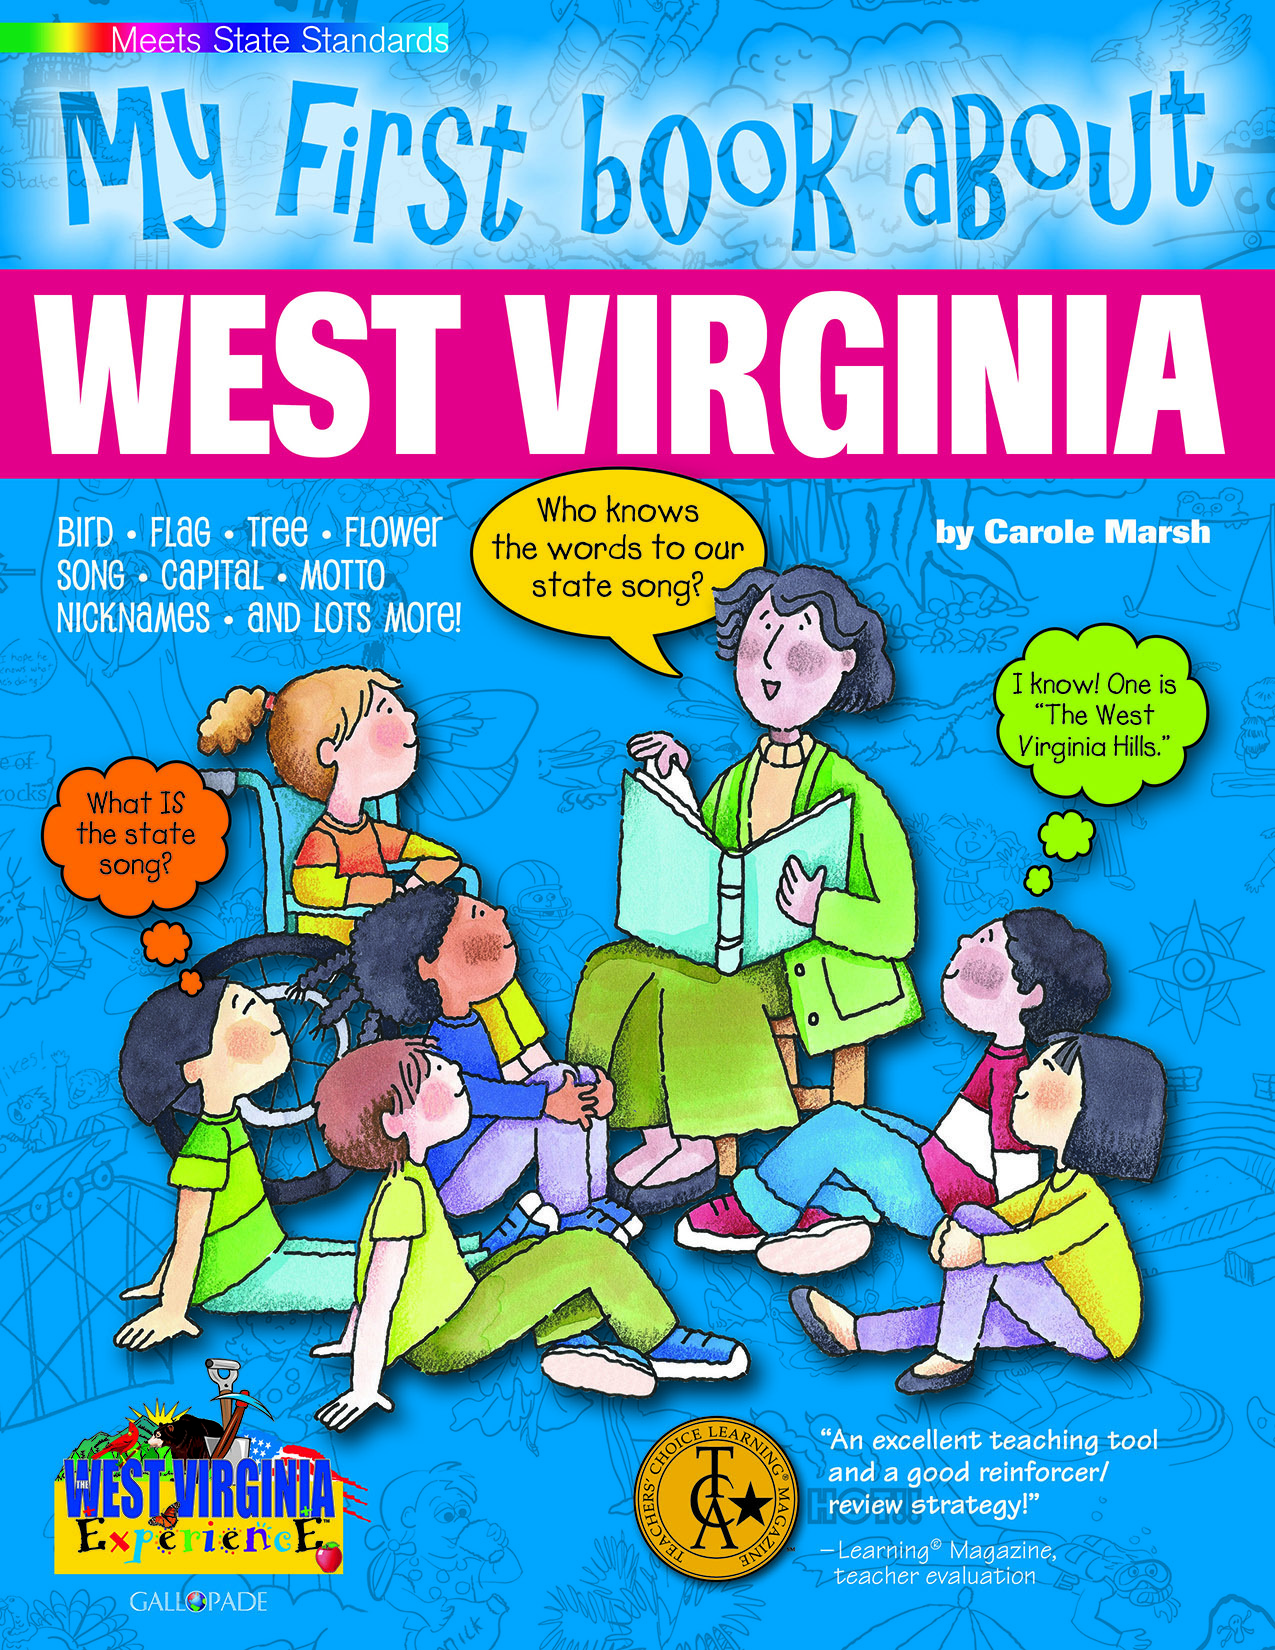 My First Book About West Virginia!